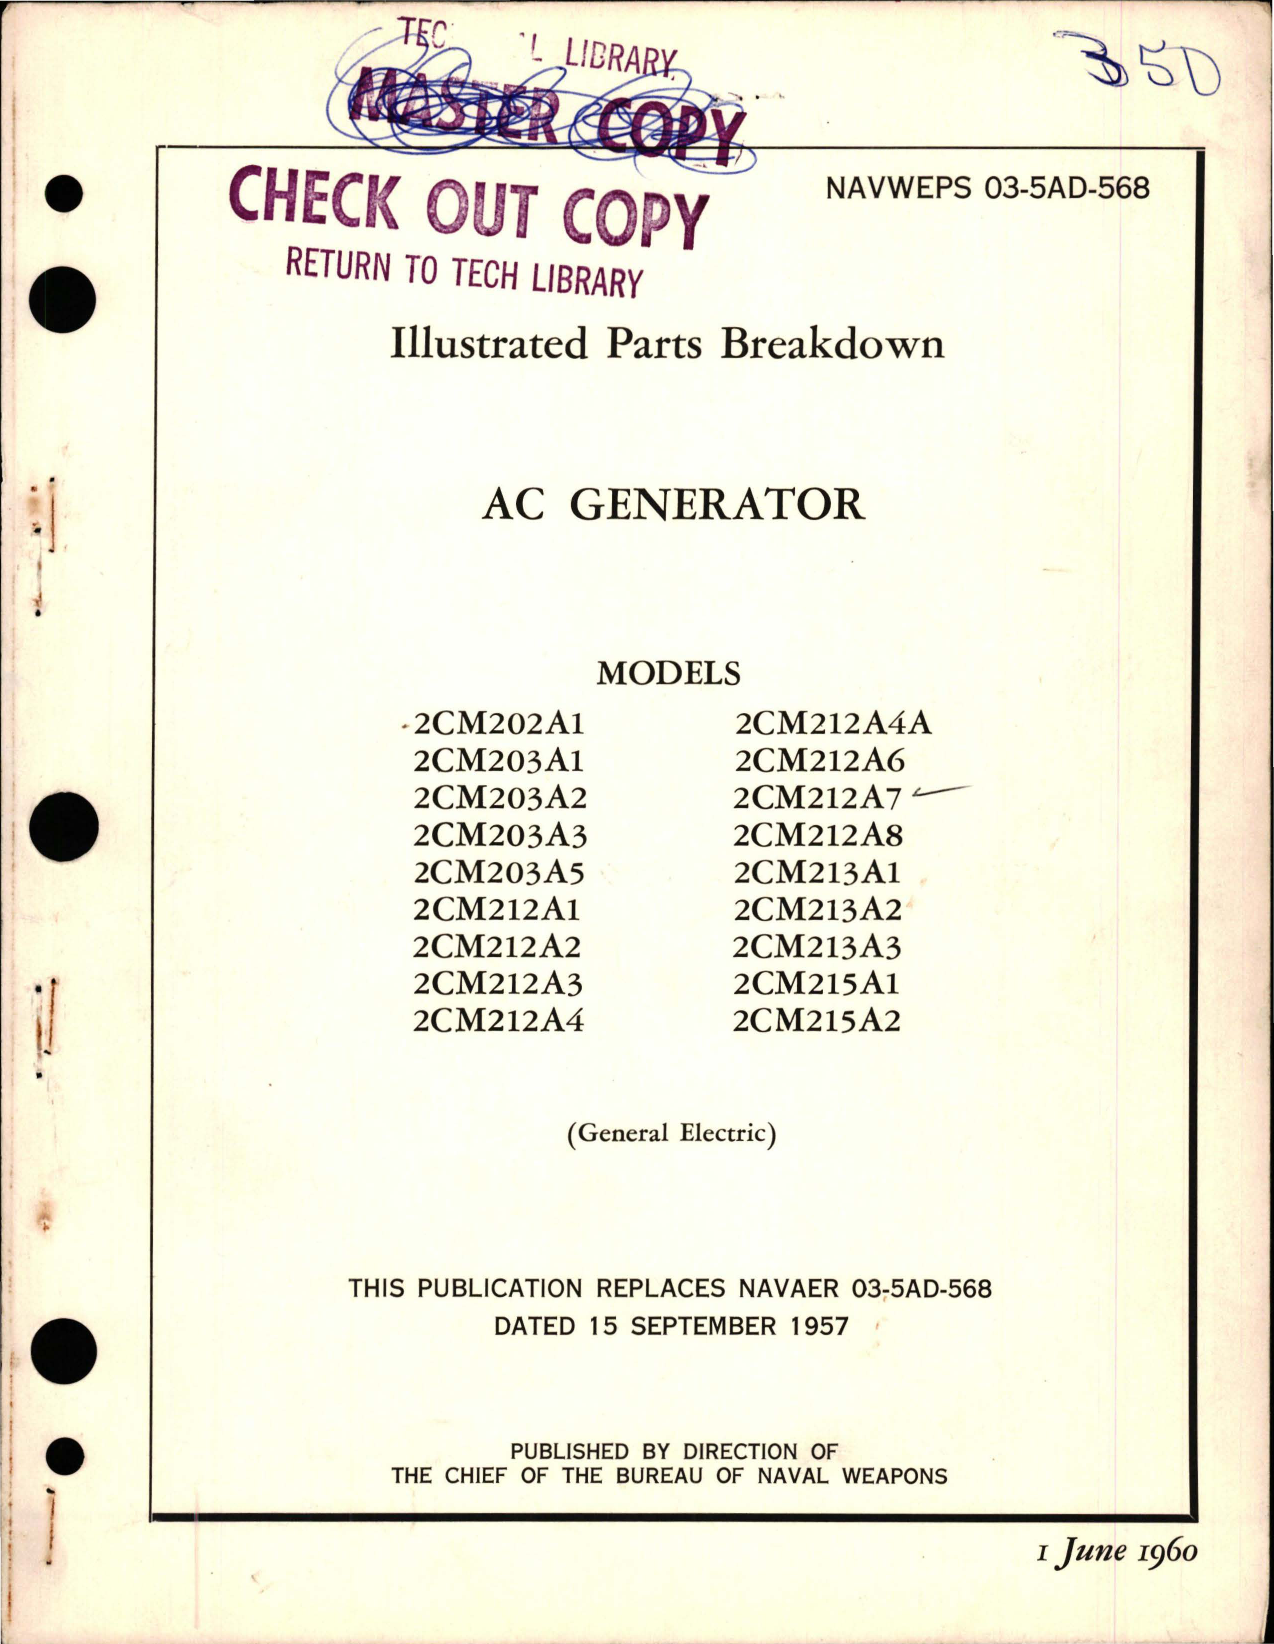 Sample page 1 from AirCorps Library document: Illustrated Parts Breakdown for AC Generator - Models 2CM202, 2CM203, 2CM212, 2CM213, 2CM215